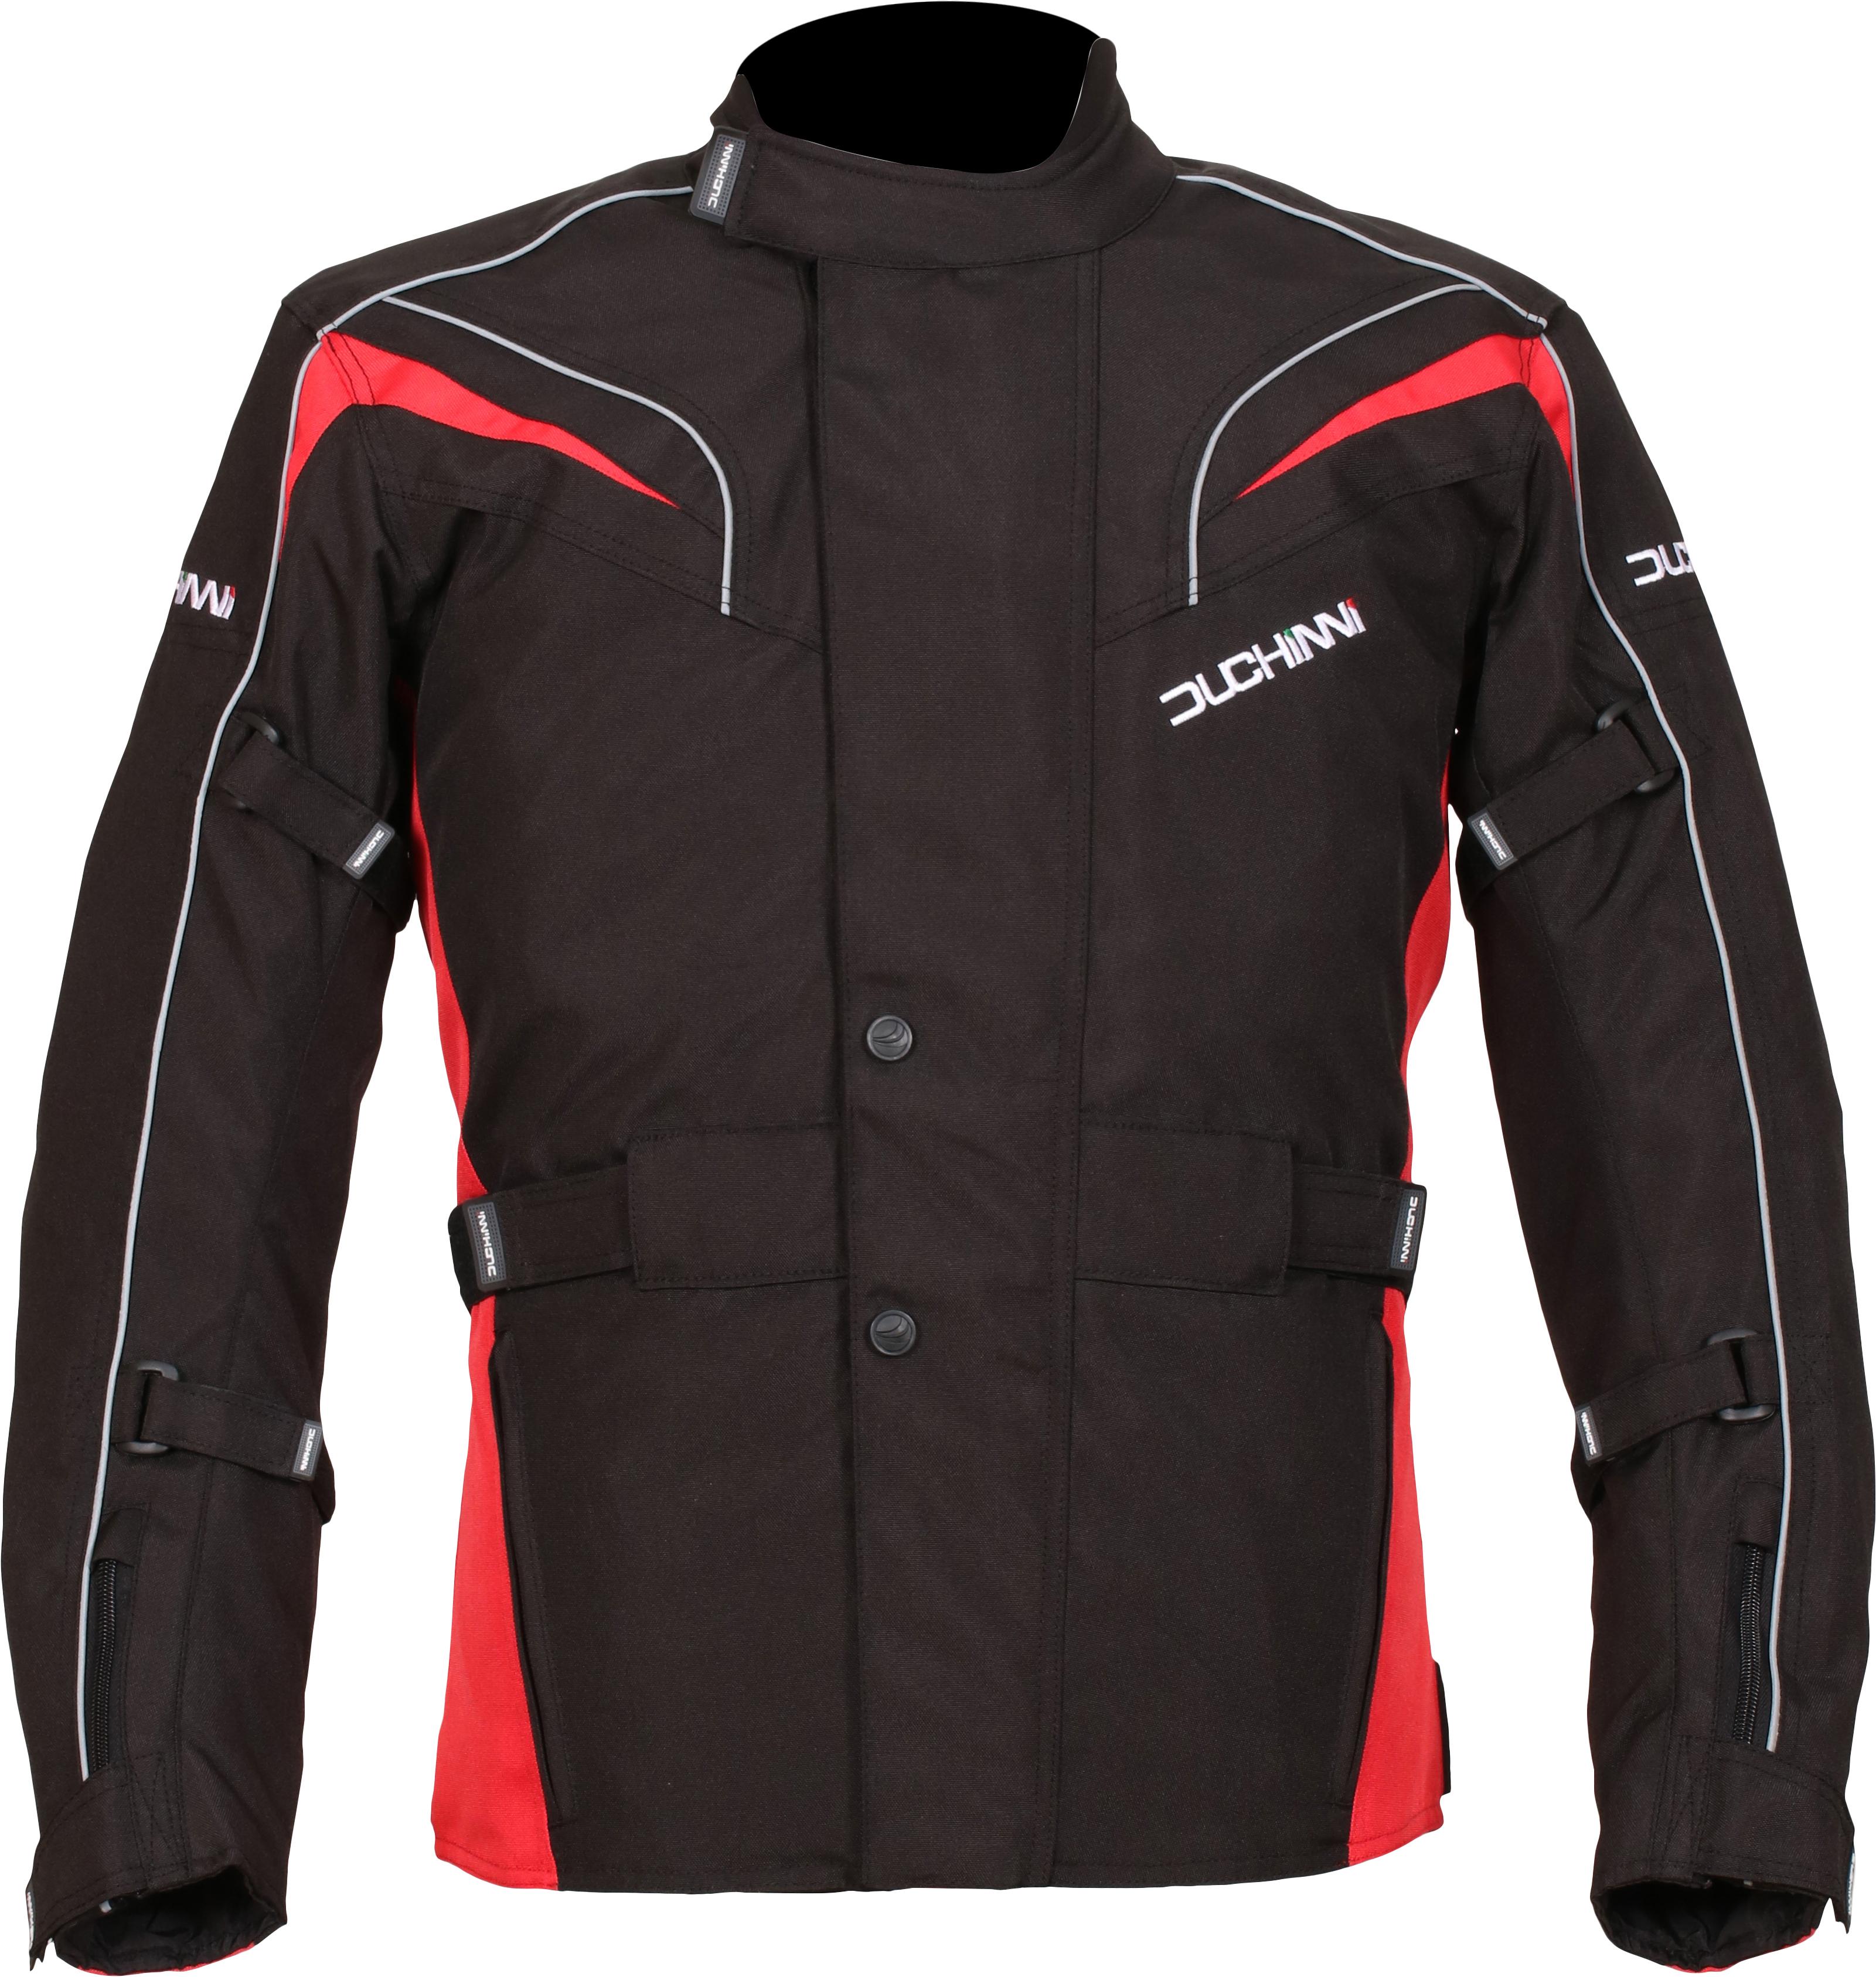 Duchinni Hurrican Motorcycle Jacket - Black And Red, L